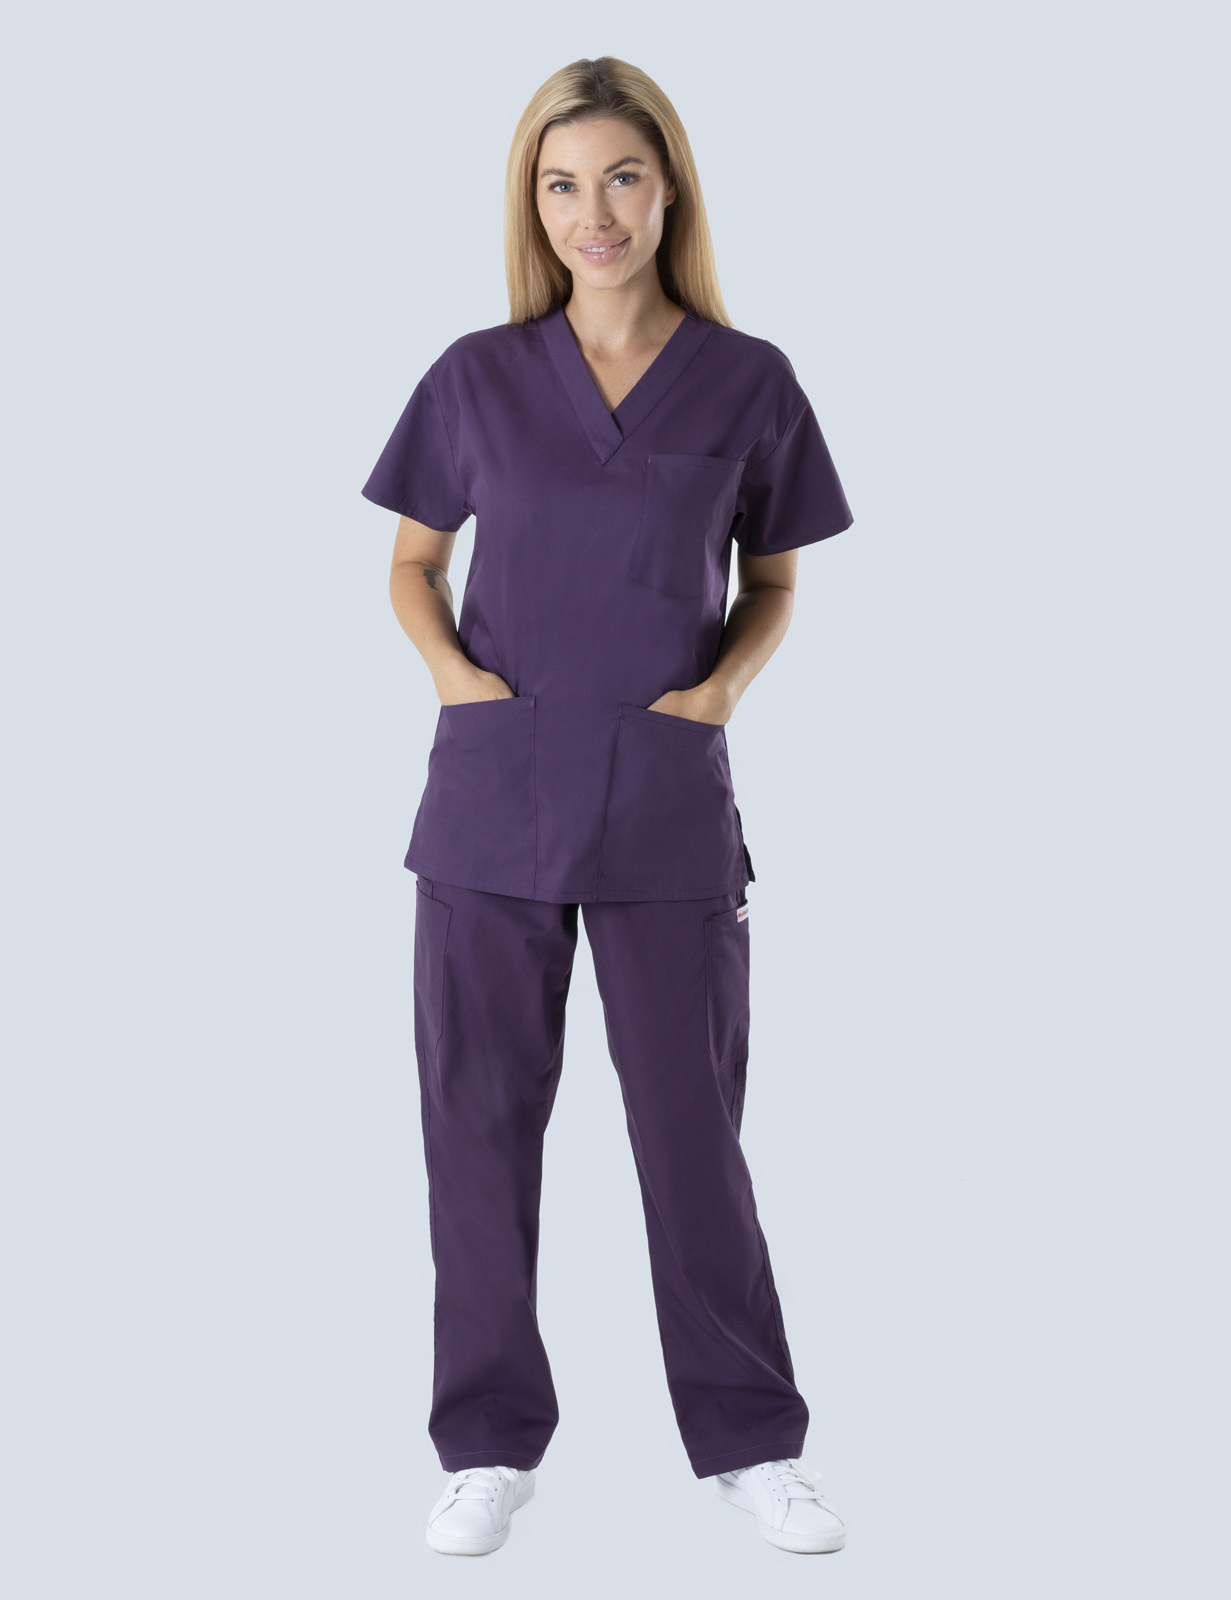 Prince Charles Hospital - ED CN (4 Pocket Scrub Top and Cargo Pants in Aubergine incl Logos)